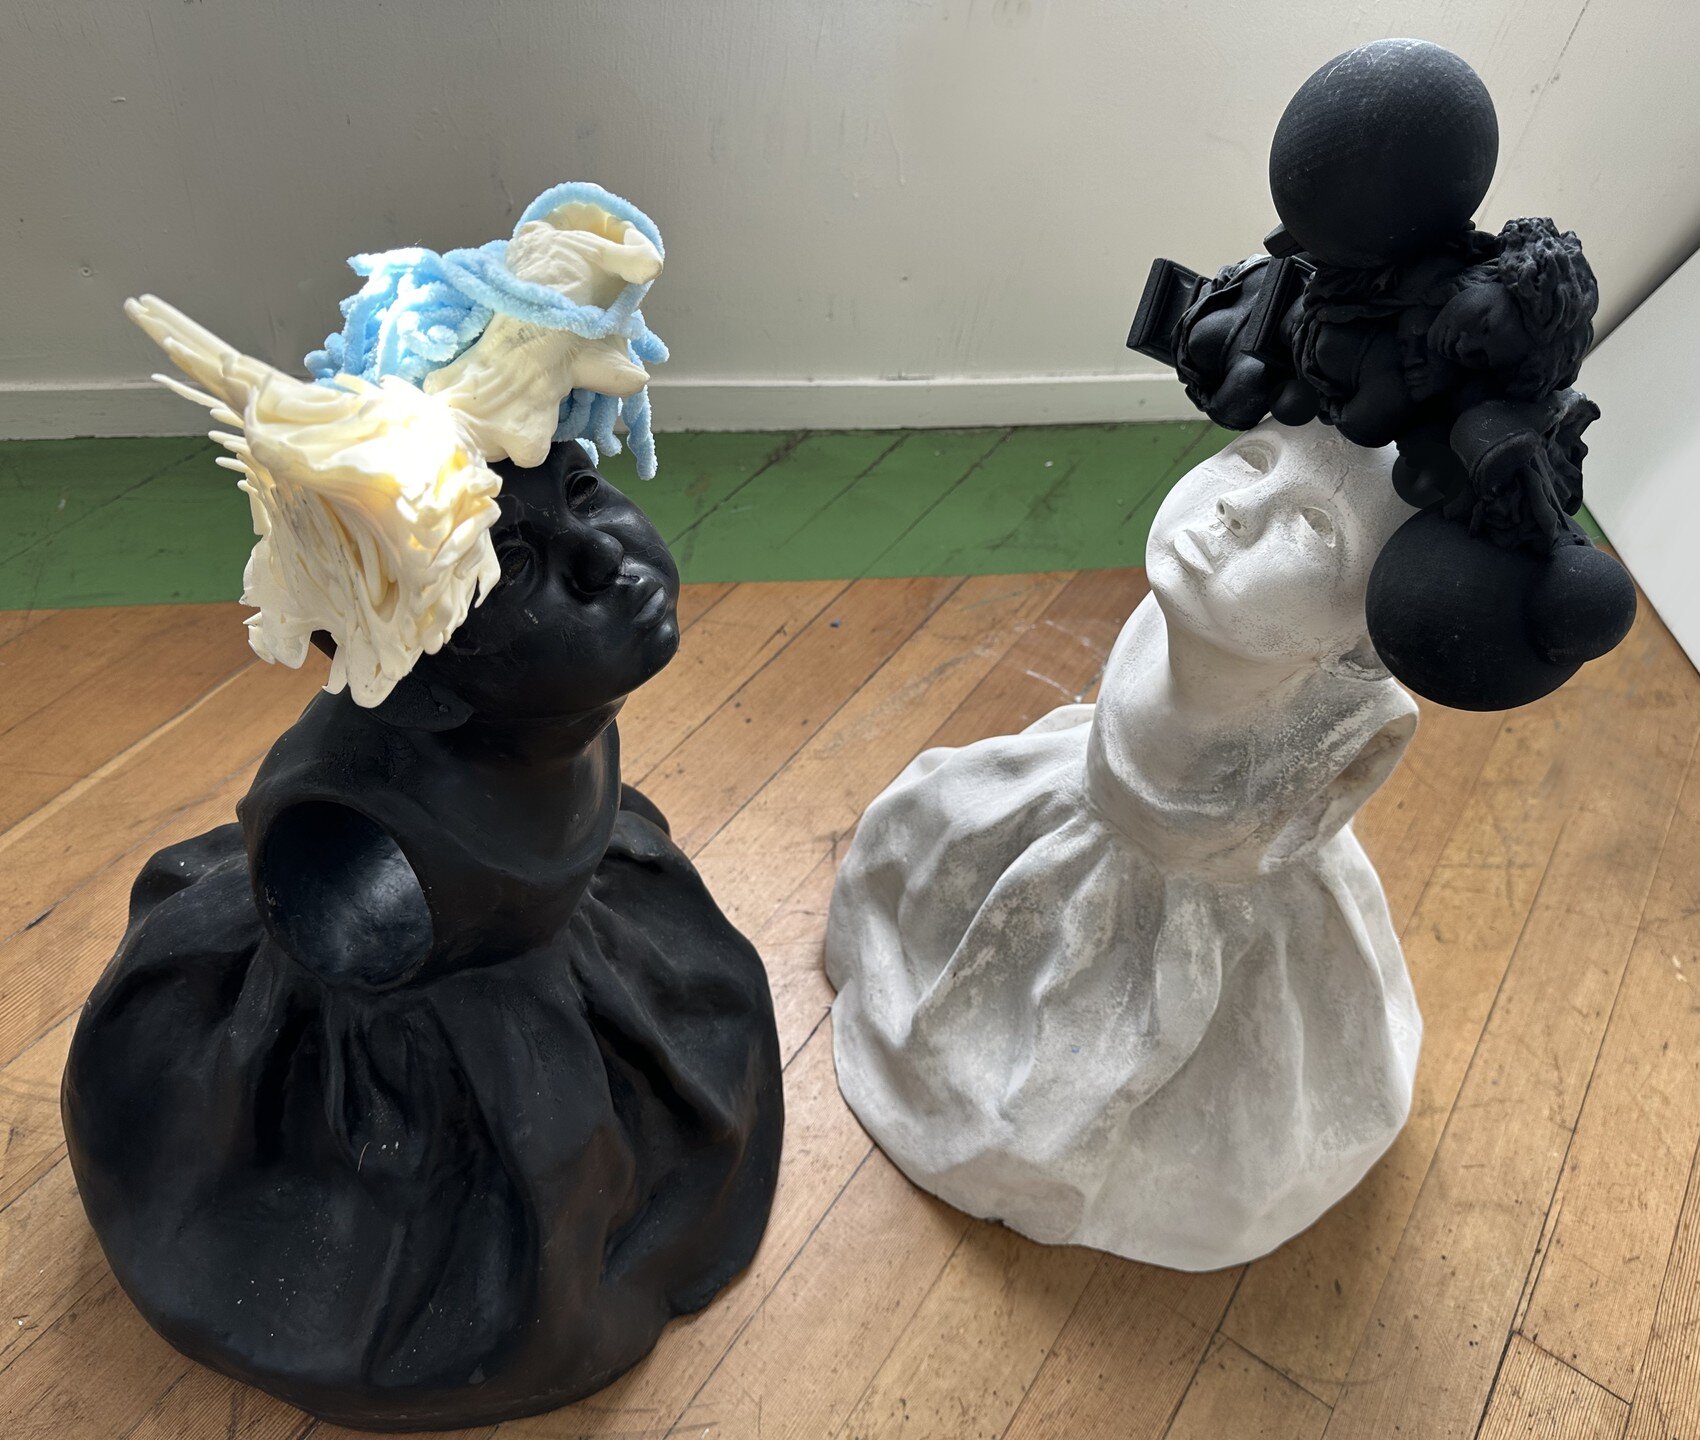 sisters, cast cement and 3D printed, conceived over more than a decade. the figures were cast in multiple colors knowing something could come of them. Each carries part of the other. Humans are frail, as children and forever. We need each other to lo